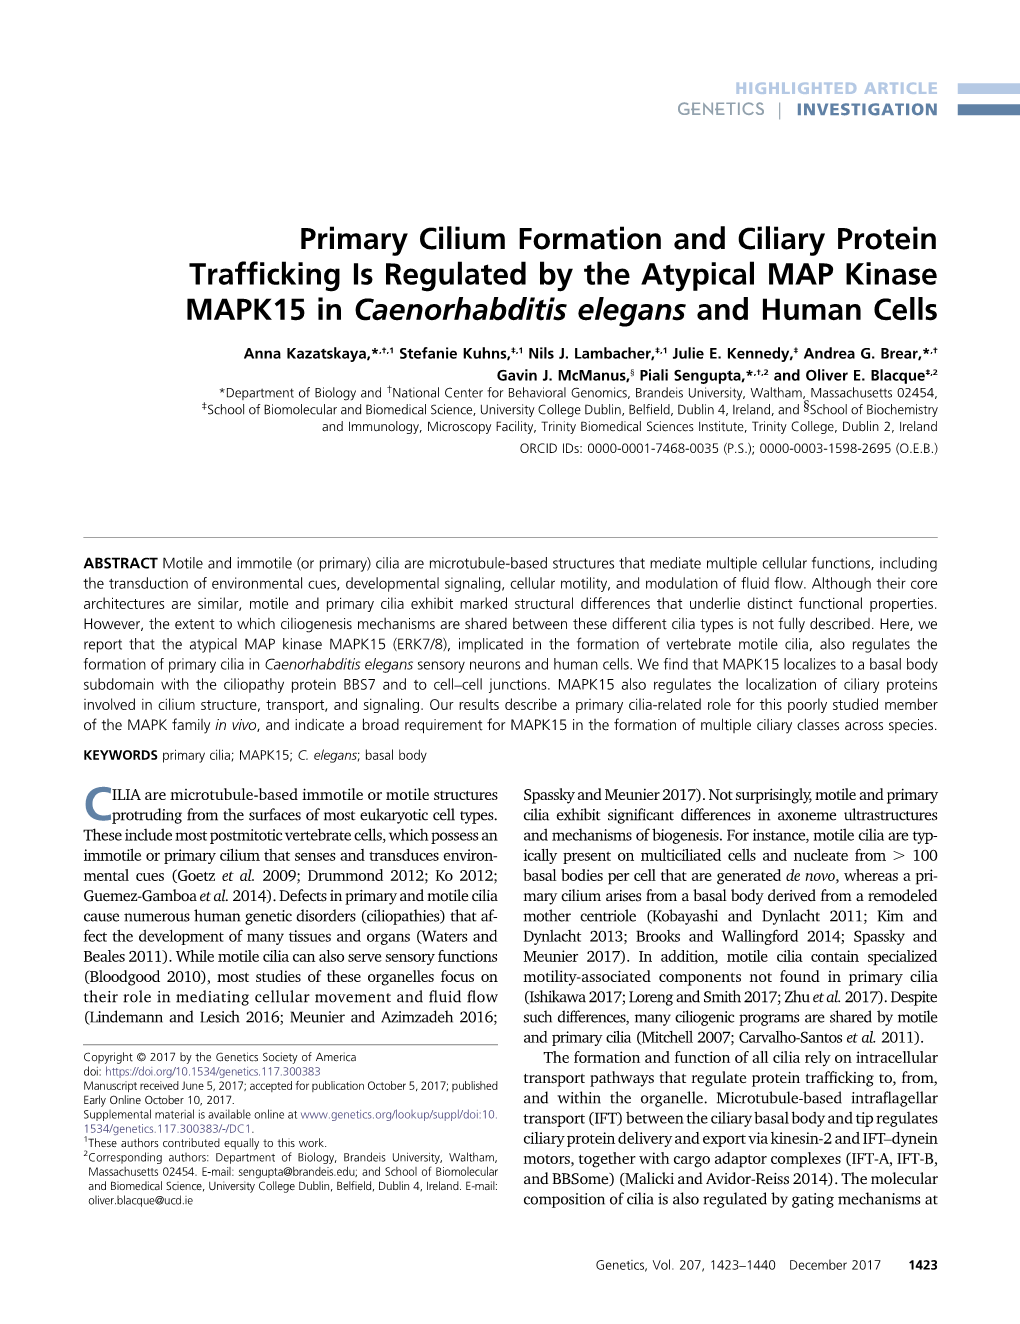 Primary Cilium Formation and Ciliary Protein Trafficking Is Regulated By